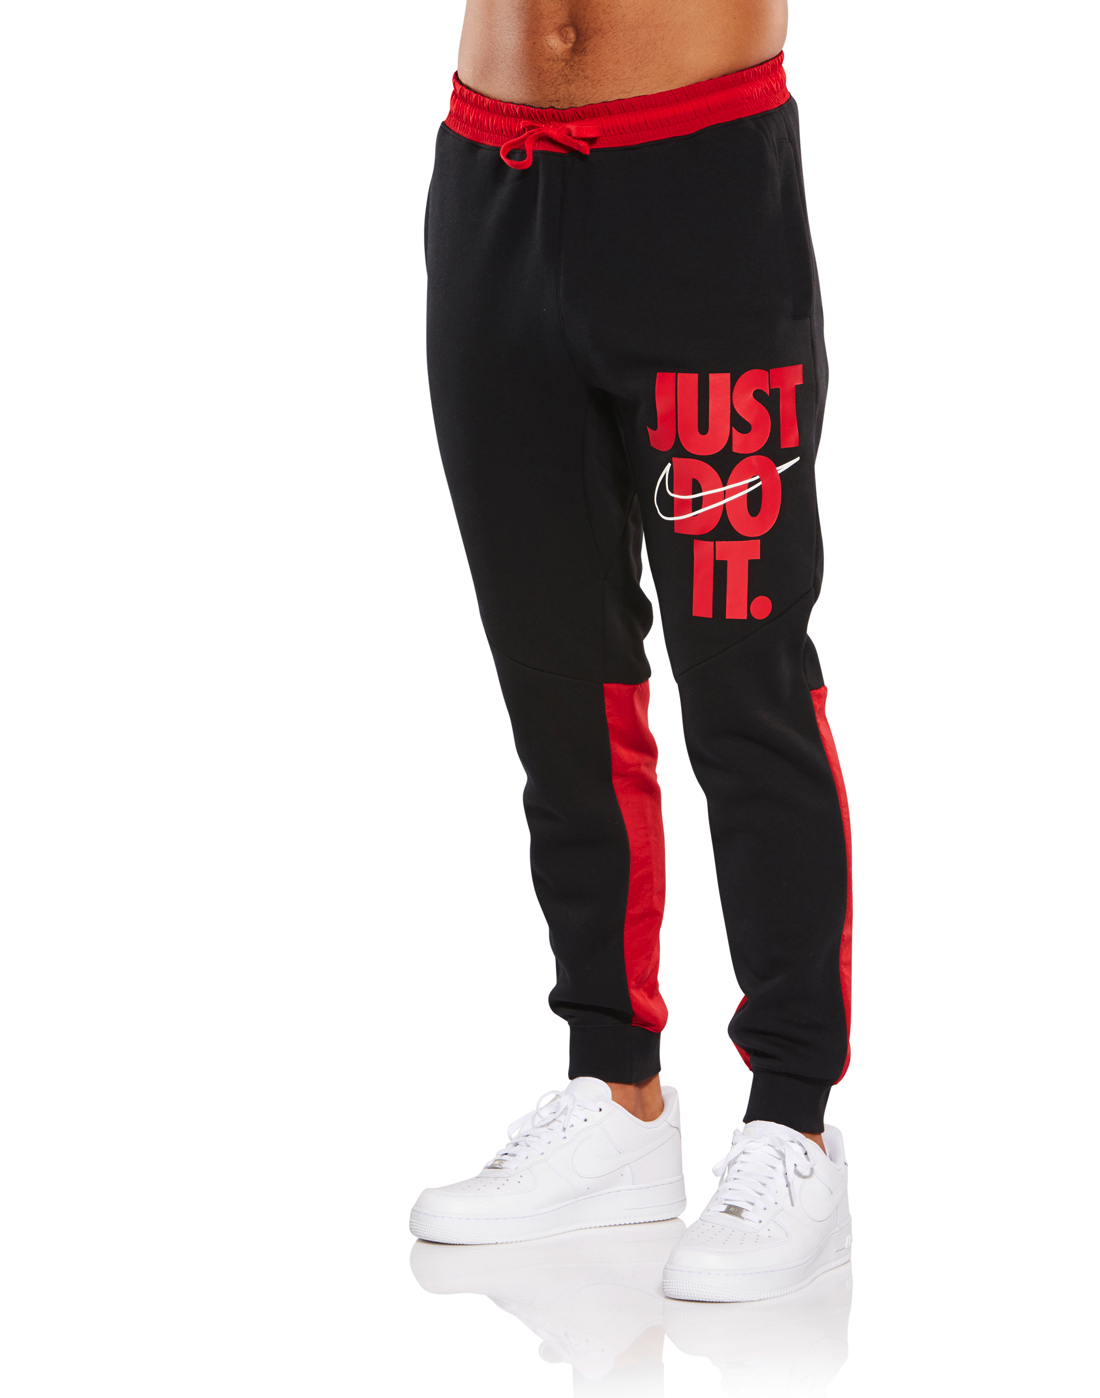 nike joggers red and black